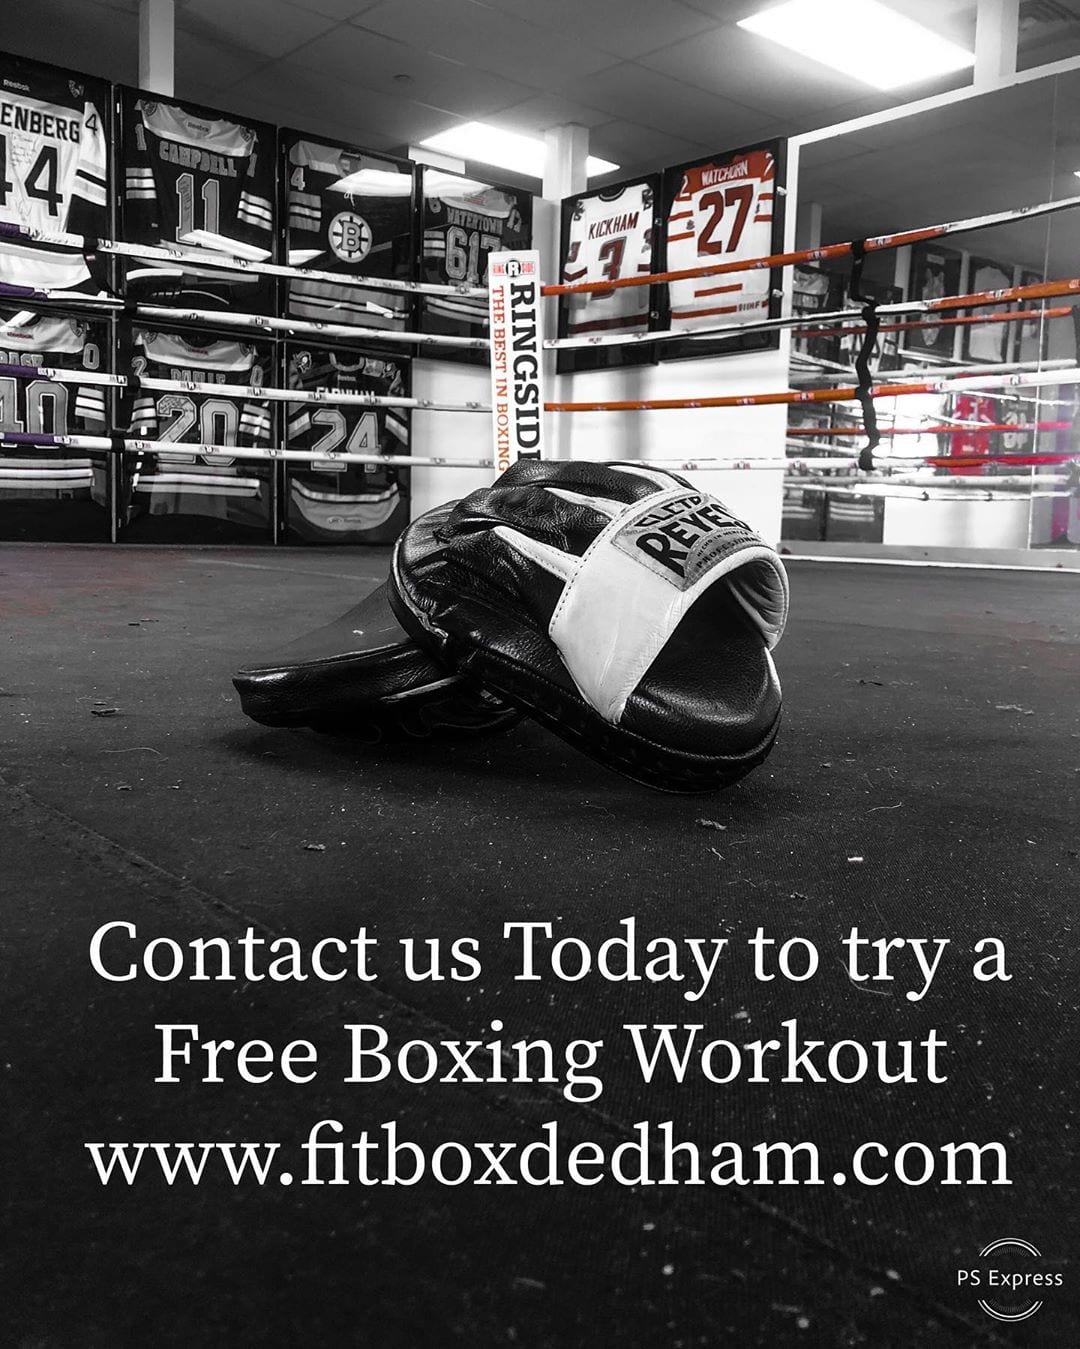 All levels welcomed to try a FREE Boxing workout at FitBOX boxing & fitness located in Dedham,Ma . #Boxing #fitness